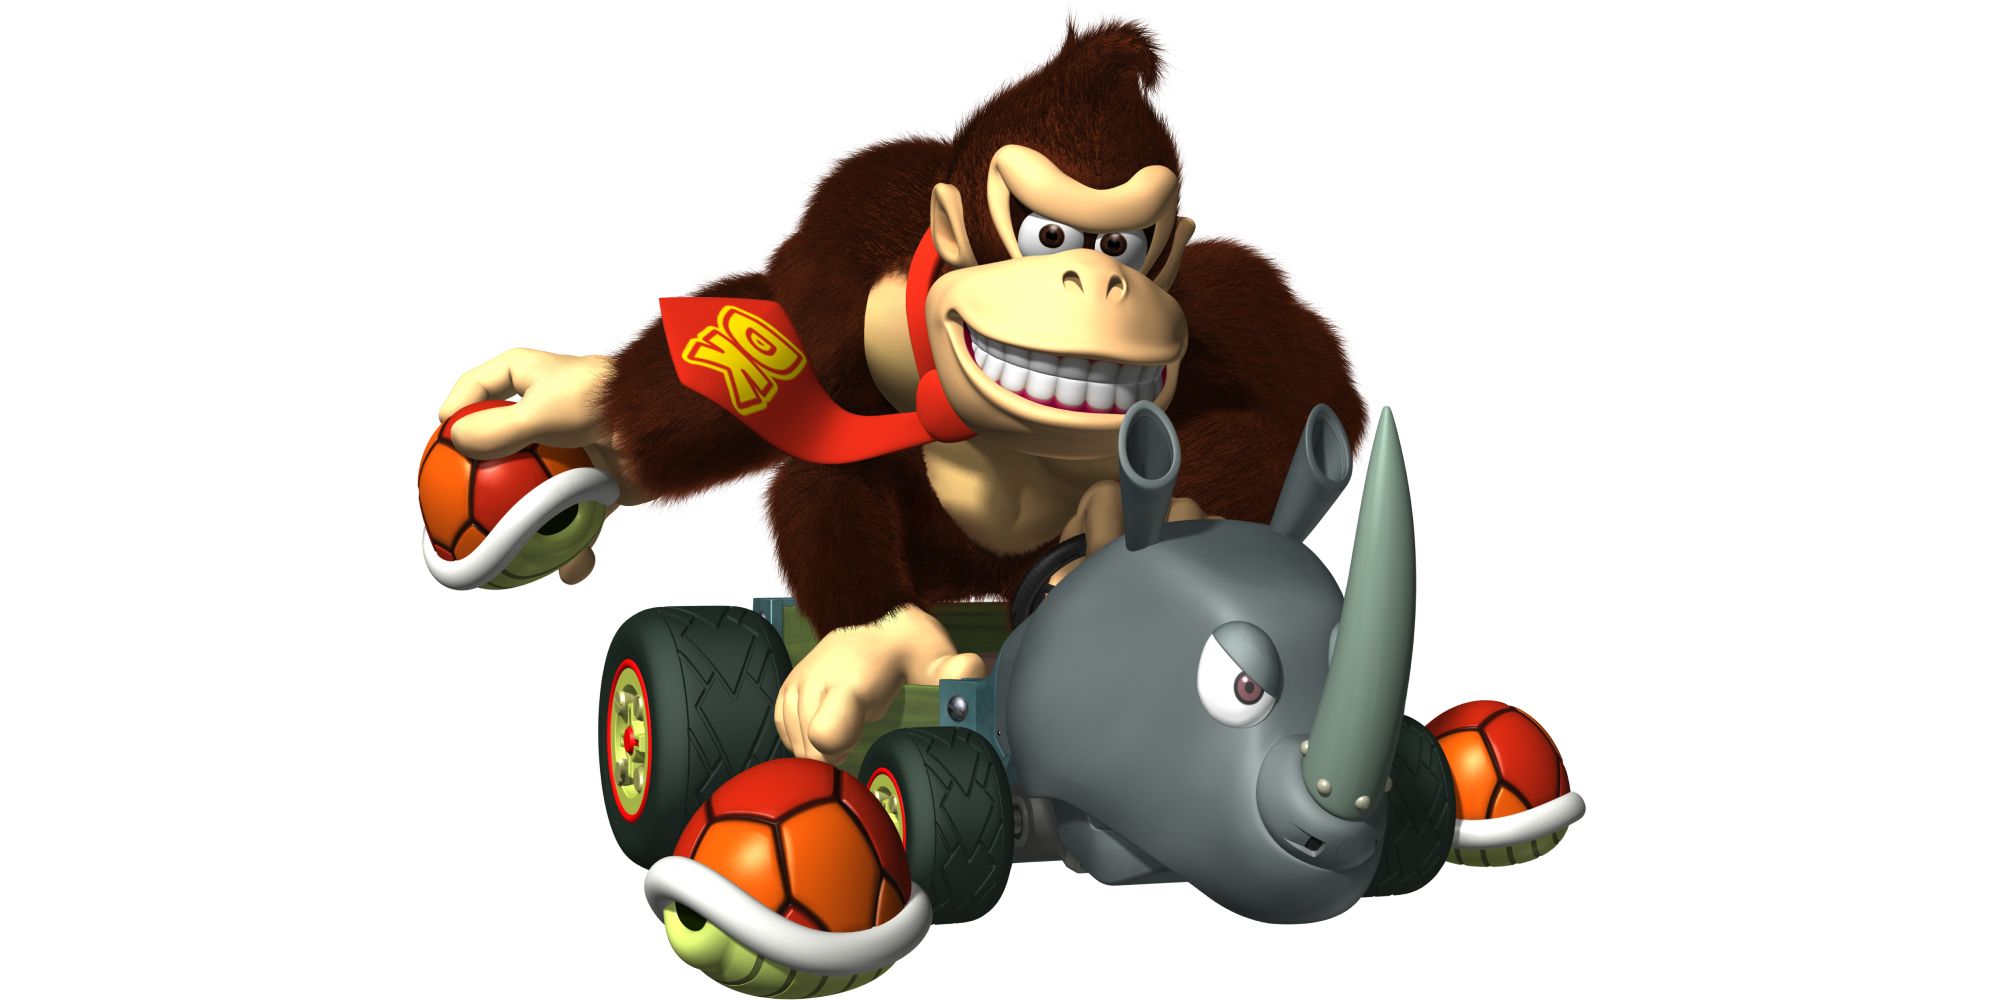 Mario Kart Vehicle Designs Donkey Kong grinning and throwing a red shell on his Rambi Raider against a white backdrop